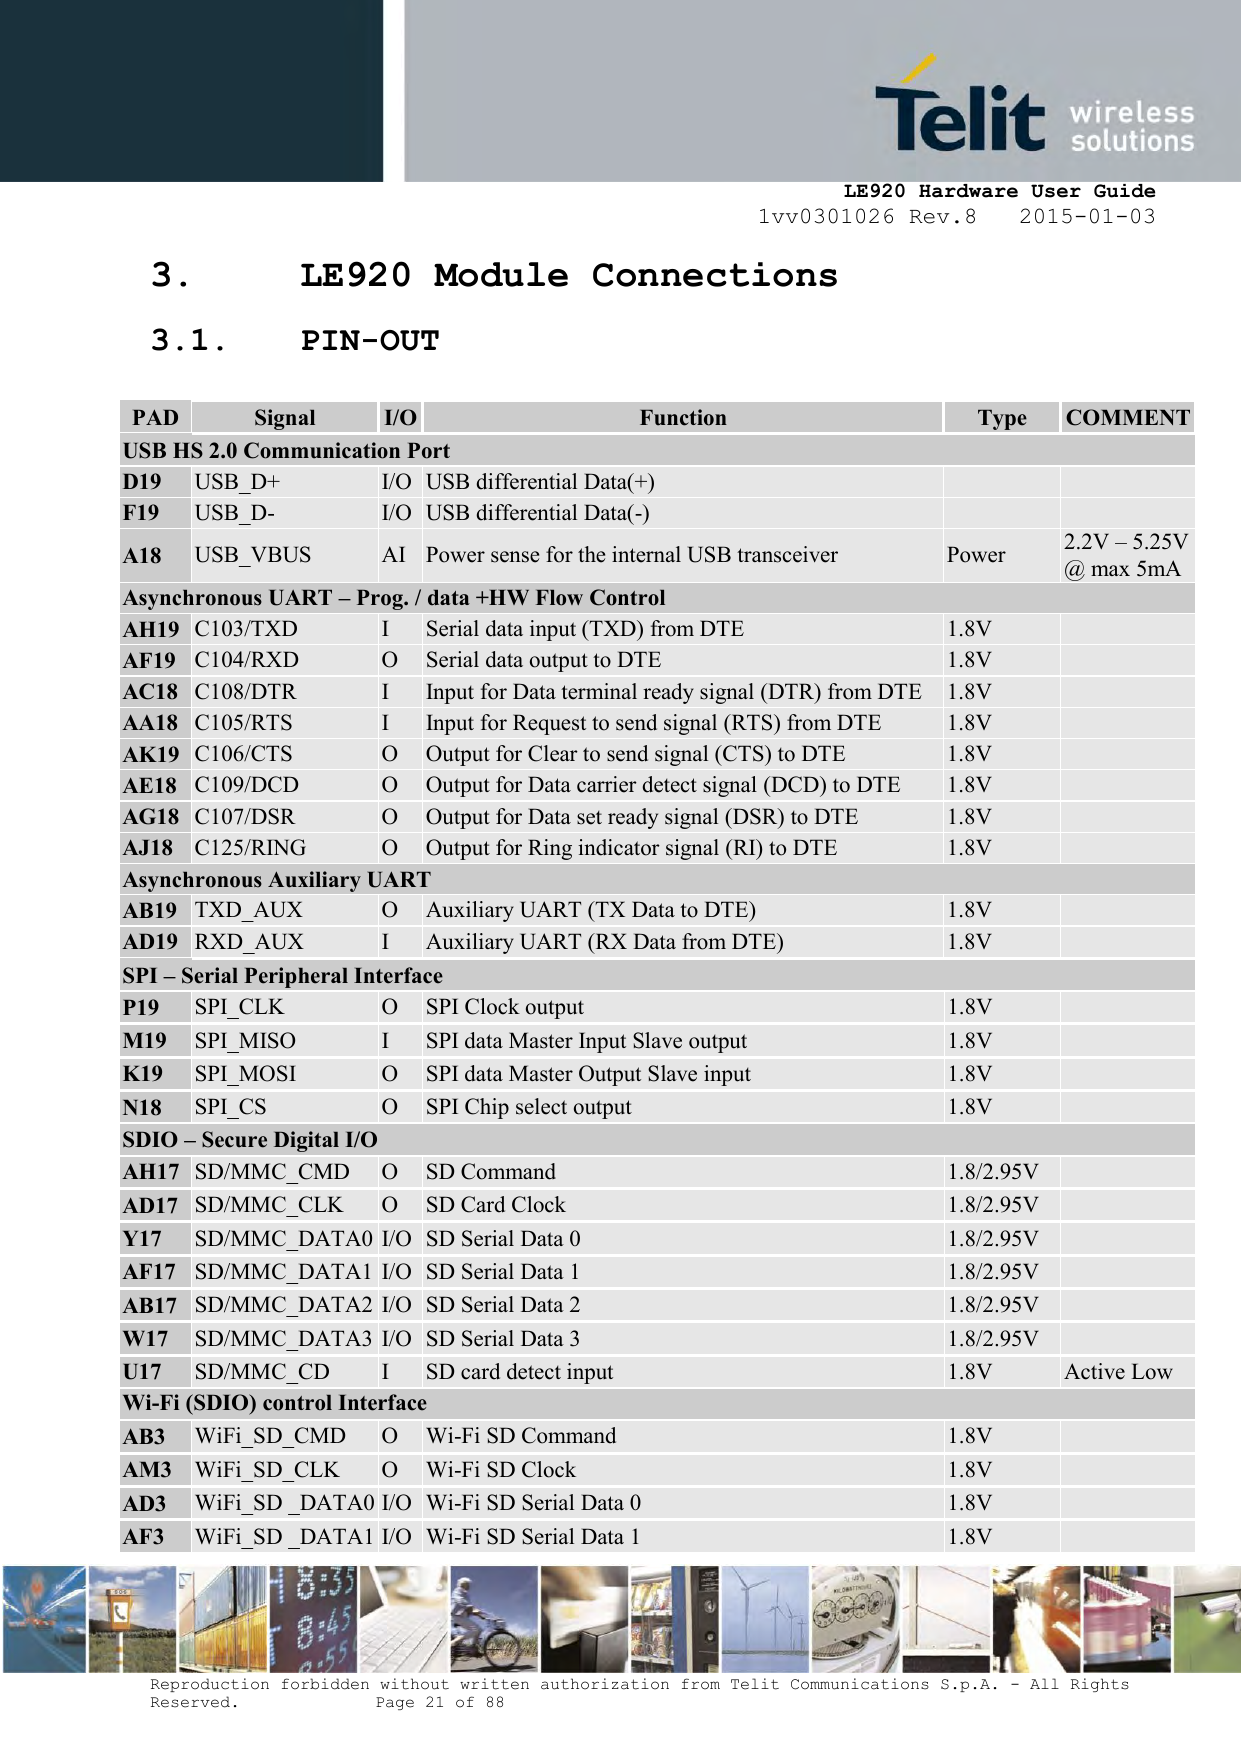     LE920 Hardware User Guide 1vv0301026 Rev.8   2015-01-03 Reproduction forbidden without written authorization from Telit Communications S.p.A. - All Rights Reserved.    Page 21 of 88  3. LE920 Module Connections 3.1. PIN-OUT  PAD Signal I/O Function Type COMMENT USB HS 2.0 Communication Port D19 USB_D+ I/O USB differential Data(+)   F19 USB_D- I/O USB differential Data(-)   A18 USB_VBUS AI Power sense for the internal USB transceiver Power 2.2V – 5.25V @ max 5mA Asynchronous UART – Prog. / data +HW Flow Control AH19 C103/TXD I Serial data input (TXD) from DTE 1.8V  AF19 C104/RXD O Serial data output to DTE 1.8V  AC18 C108/DTR I Input for Data terminal ready signal (DTR) from DTE 1.8V  AA18 C105/RTS I Input for Request to send signal (RTS) from DTE 1.8V  AK19 C106/CTS O Output for Clear to send signal (CTS) to DTE 1.8V  AE18 C109/DCD O Output for Data carrier detect signal (DCD) to DTE 1.8V  AG18 C107/DSR O Output for Data set ready signal (DSR) to DTE 1.8V  AJ18 C125/RING O Output for Ring indicator signal (RI) to DTE 1.8V  Asynchronous Auxiliary UART AB19 TXD_AUX O Auxiliary UART (TX Data to DTE) 1.8V  AD19 RXD_AUX I Auxiliary UART (RX Data from DTE) 1.8V  SPI – Serial Peripheral Interface P19 SPI_CLK O SPI Clock output 1.8V   M19 SPI_MISO I SPI data Master Input Slave output 1.8V   K19 SPI_MOSI O SPI data Master Output Slave input 1.8V   N18 SPI_CS O SPI Chip select output 1.8V   SDIO – Secure Digital I/O AH17 SD/MMC_CMD O SD Command 1.8/2.95V   AD17 SD/MMC_CLK O SD Card Clock 1.8/2.95V   Y17 SD/MMC_DATA0 I/O SD Serial Data 0 1.8/2.95V   AF17 SD/MMC_DATA1 I/O SD Serial Data 1 1.8/2.95V   AB17 SD/MMC_DATA2 I/O SD Serial Data 2 1.8/2.95V   W17 SD/MMC_DATA3 I/O SD Serial Data 3 1.8/2.95V   U17 SD/MMC_CD I SD card detect input 1.8V Active Low  Wi-Fi (SDIO) control Interface AB3 WiFi_SD_CMD O Wi-Fi SD Command 1.8V   AM3 WiFi_SD_CLK O Wi-Fi SD Clock 1.8V   AD3 WiFi_SD _DATA0 I/O Wi-Fi SD Serial Data 0 1.8V   AF3 WiFi_SD _DATA1 I/O Wi-Fi SD Serial Data 1 1.8V   